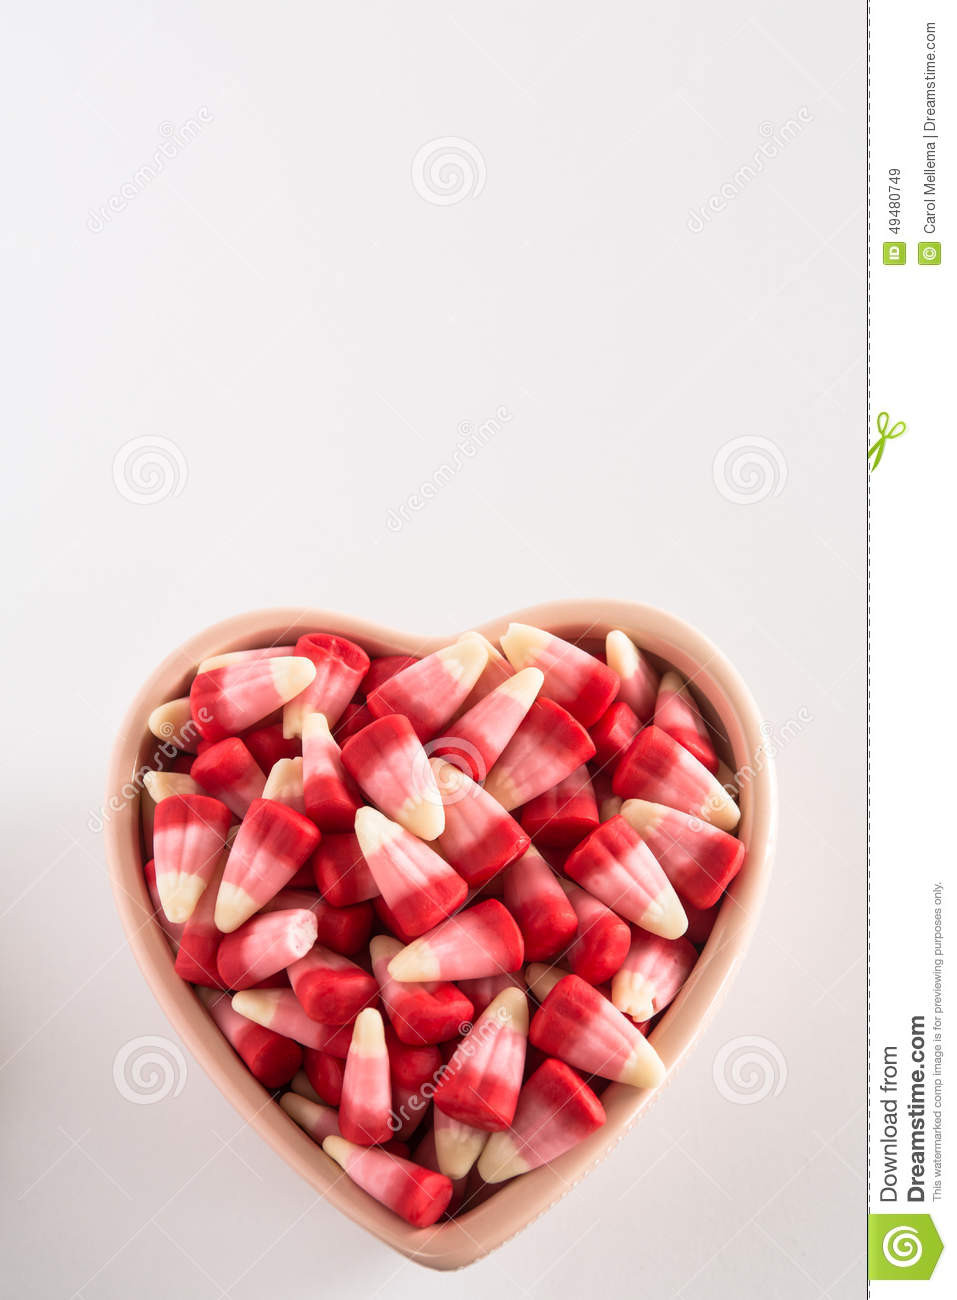 Valentines Day Candy Corn
 Valentines Day Candy Corn In Heart Shaped Bowl Stock